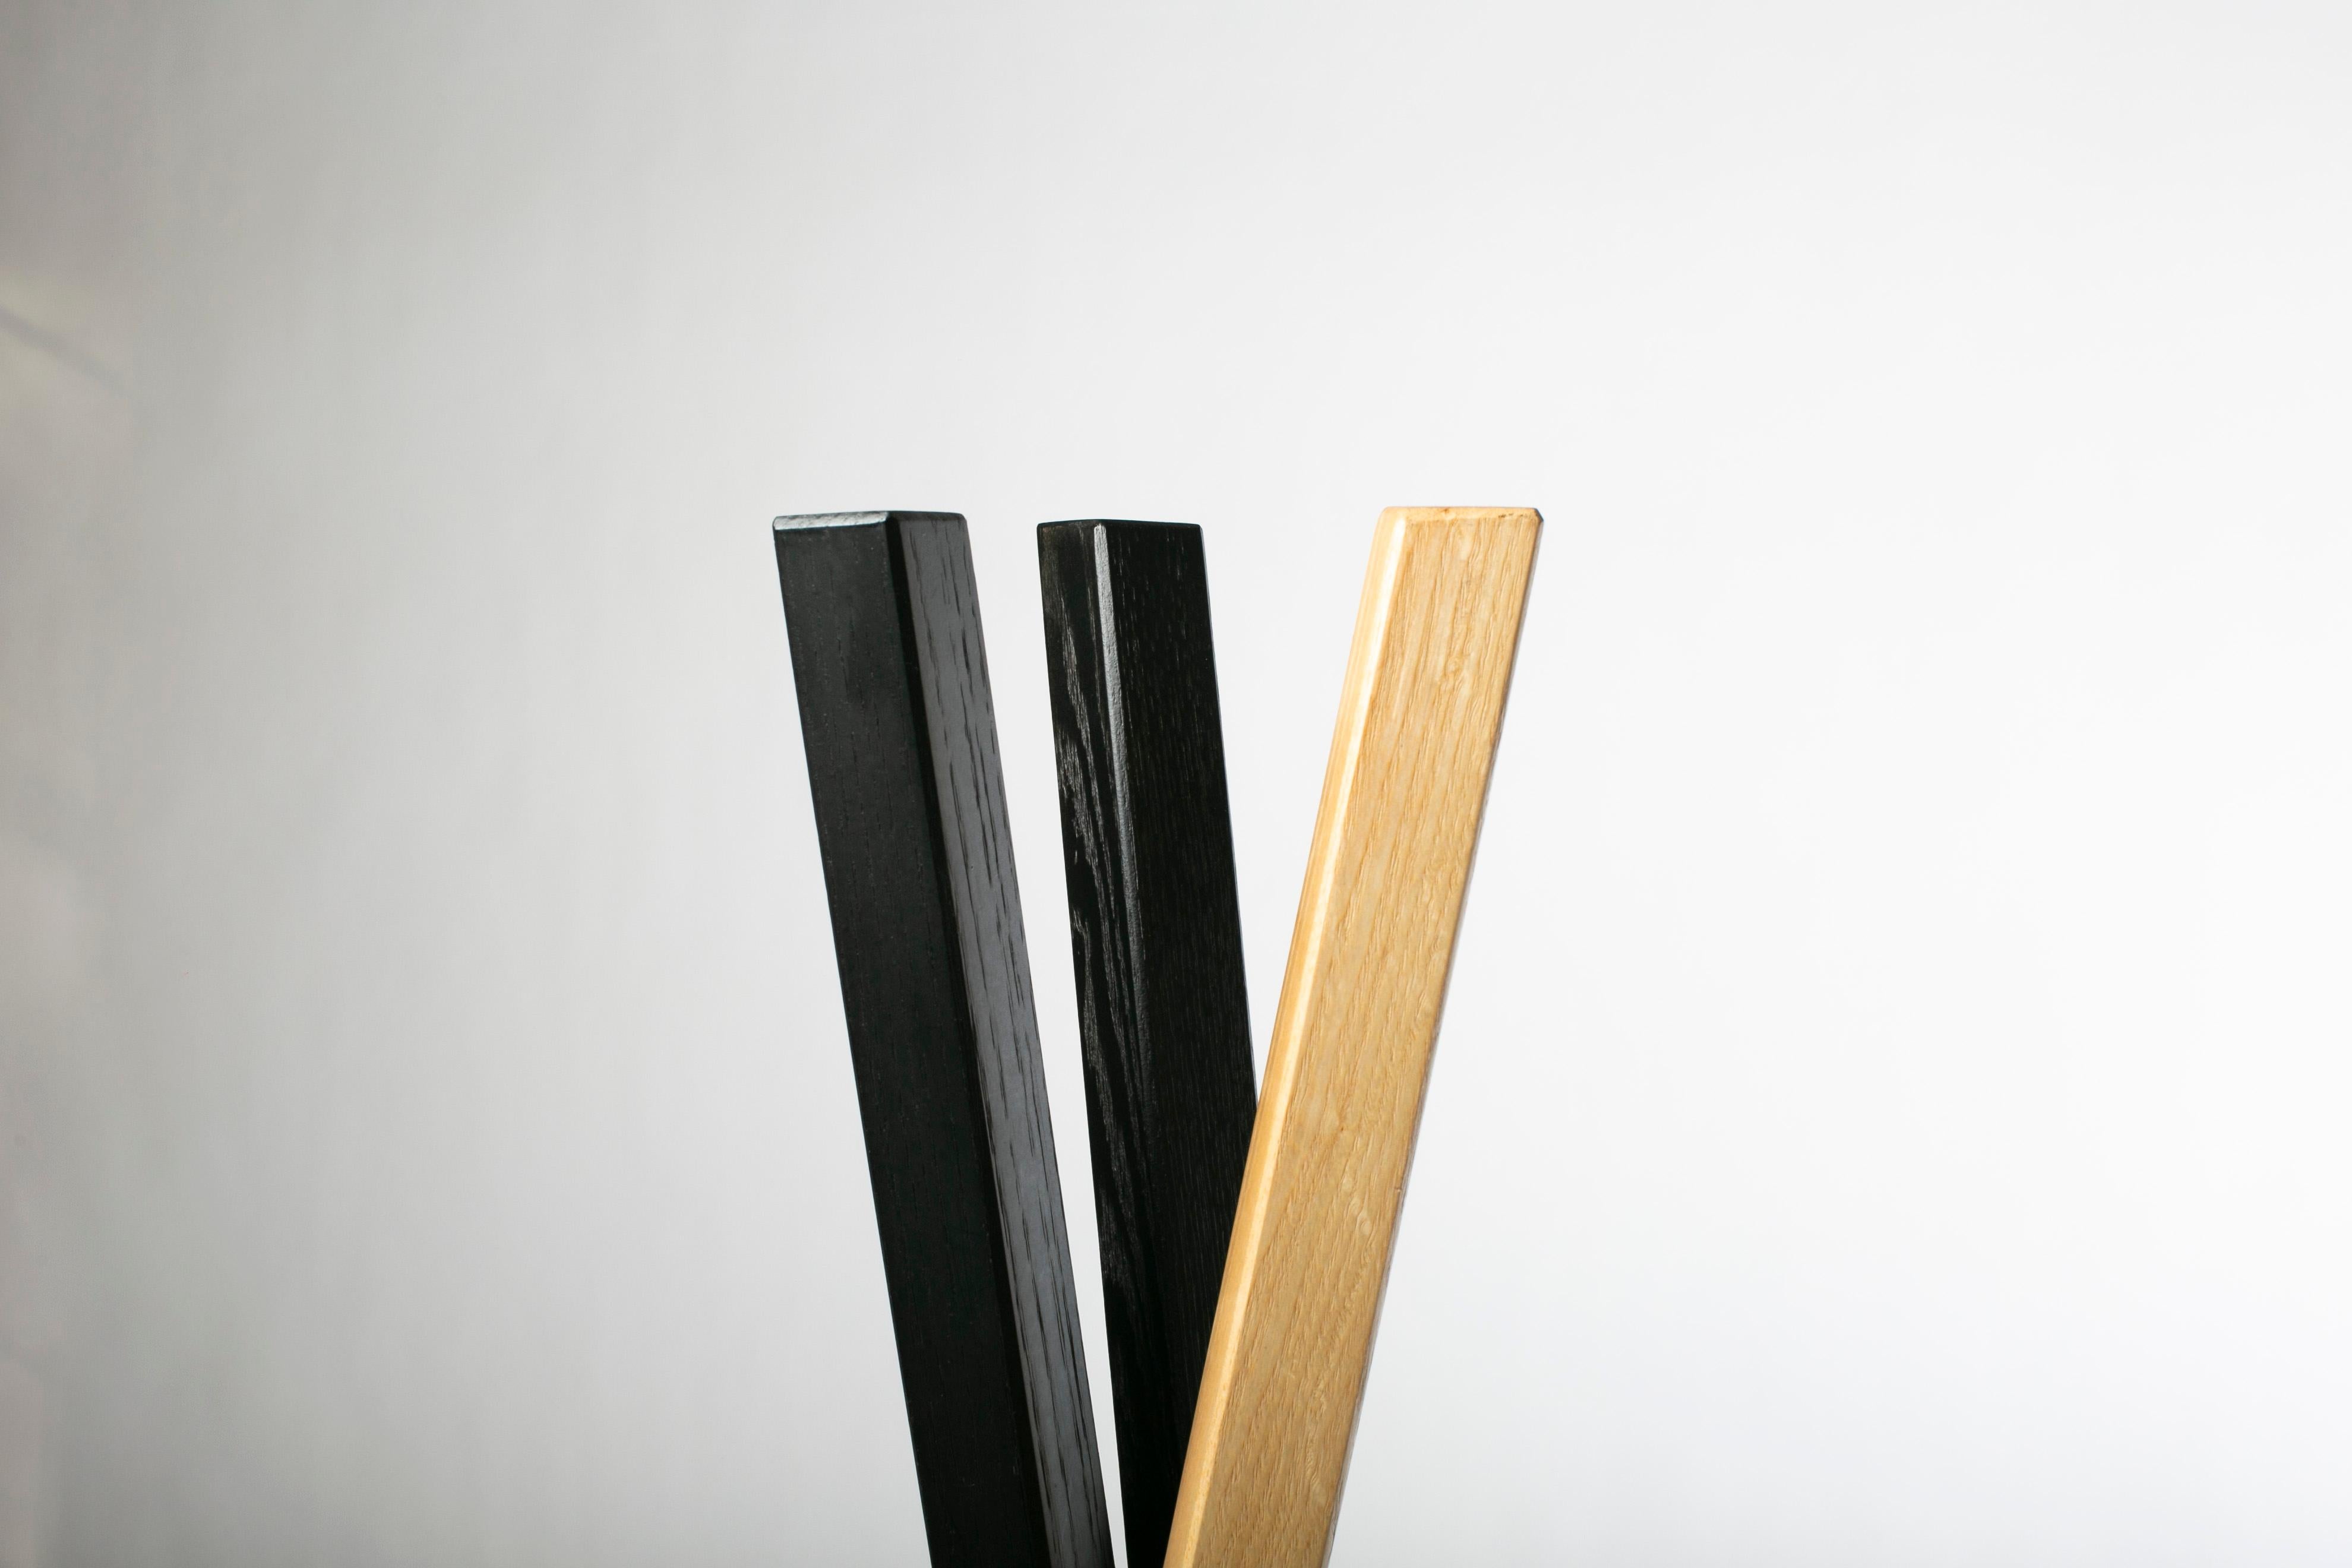 This stand-coat rack it's made from 3 legs that interlace to form an elegant solid hardwood structure that will set the tone of the space it's inhabiting.

Designed by Juskani Alonso Studio. Produced in Mexico City.